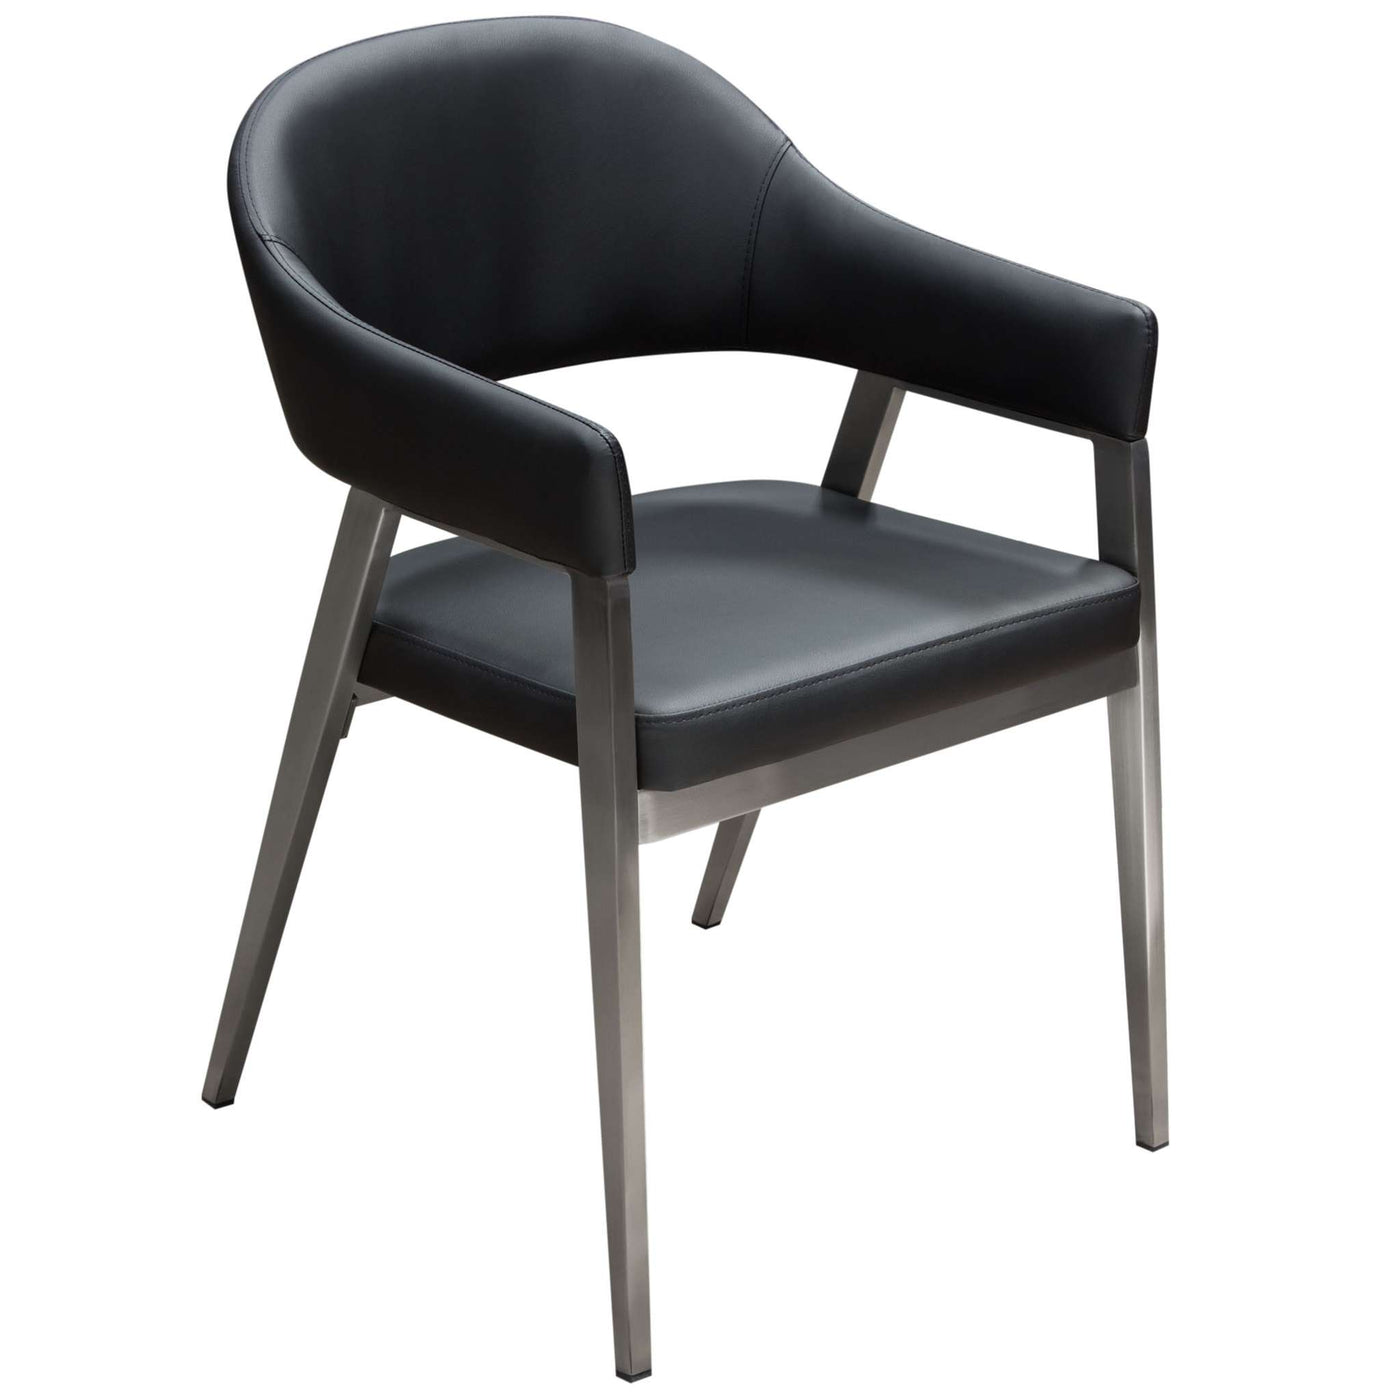 Adele Chairs in Leatherette w/ Brushed Stainless Steel Leg by Diamond Sofa